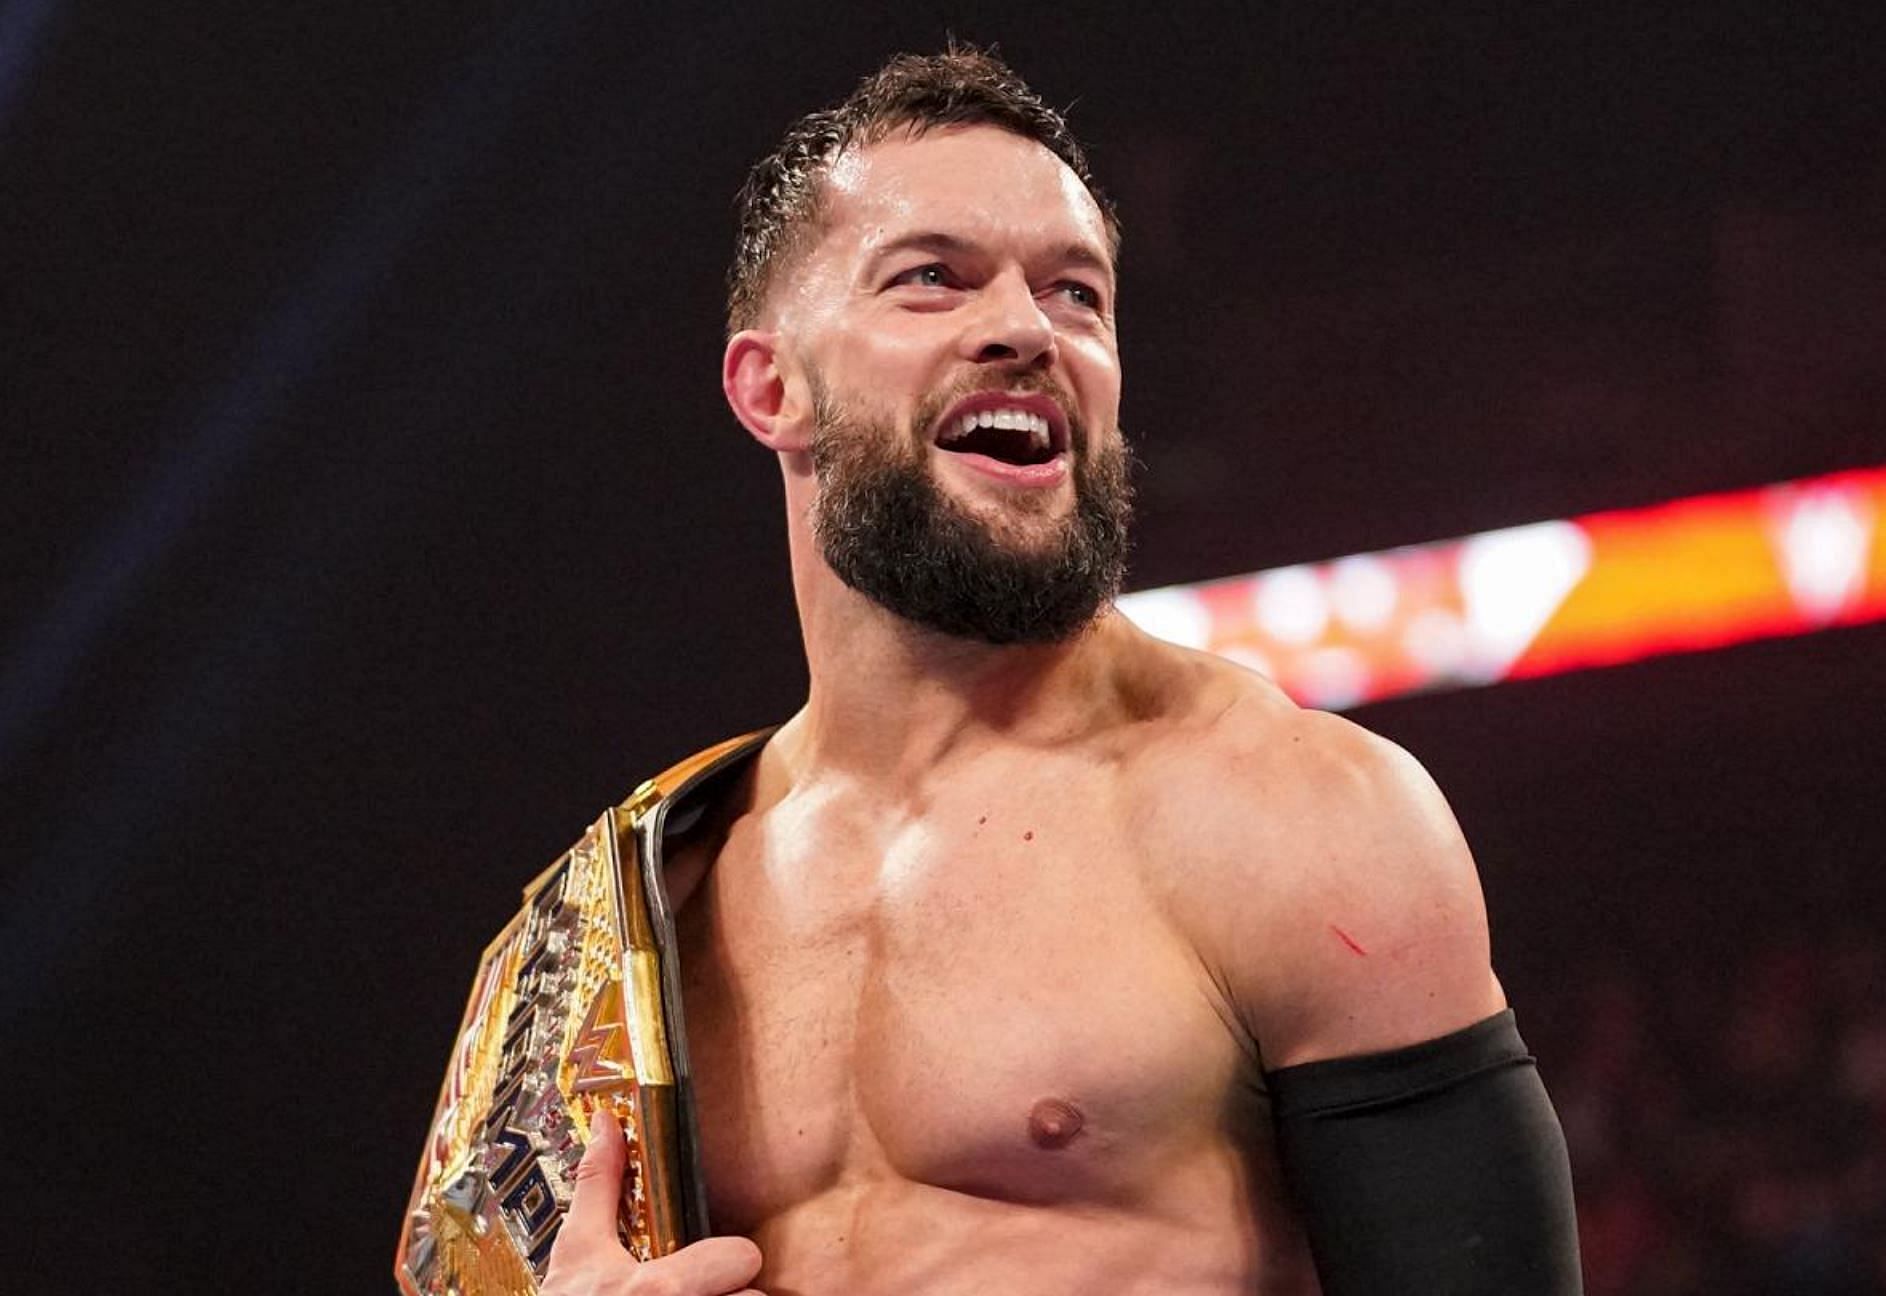 Finn Balor had defeated Damian Priest to win the US Championship